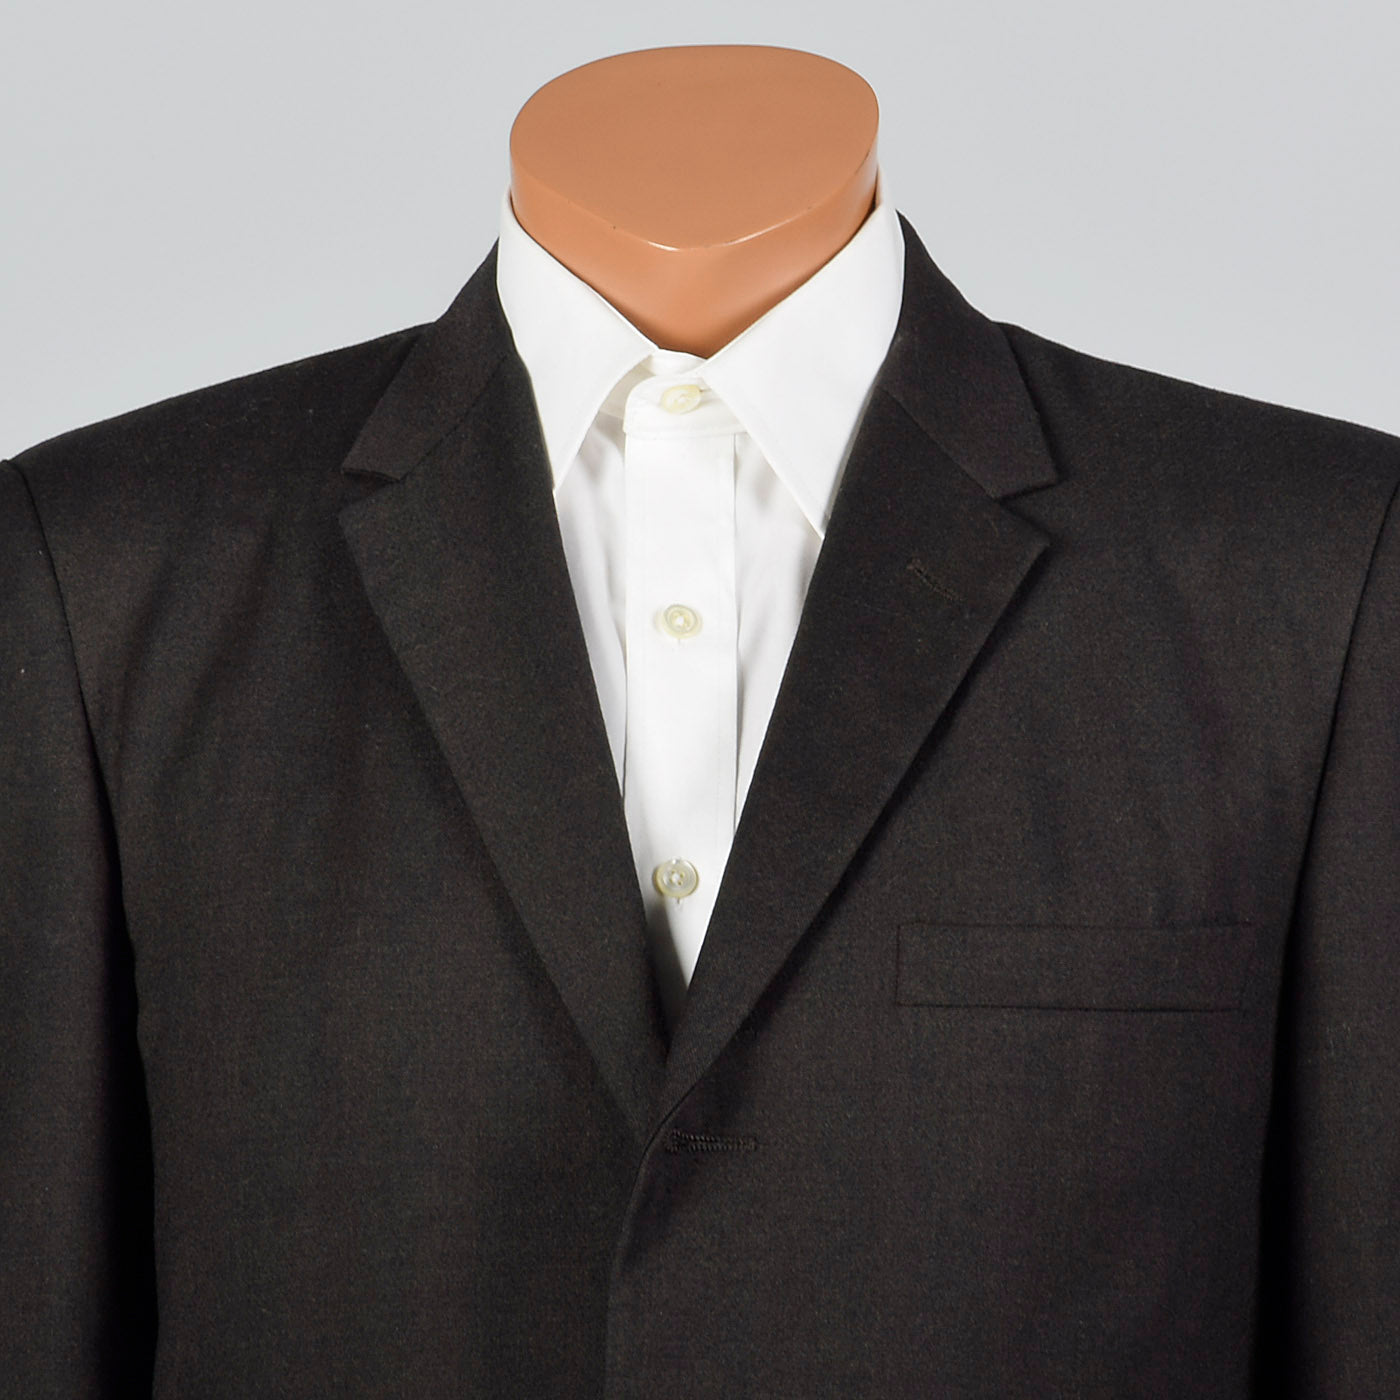 1960s Mens Brown and Black Two Piece Suit